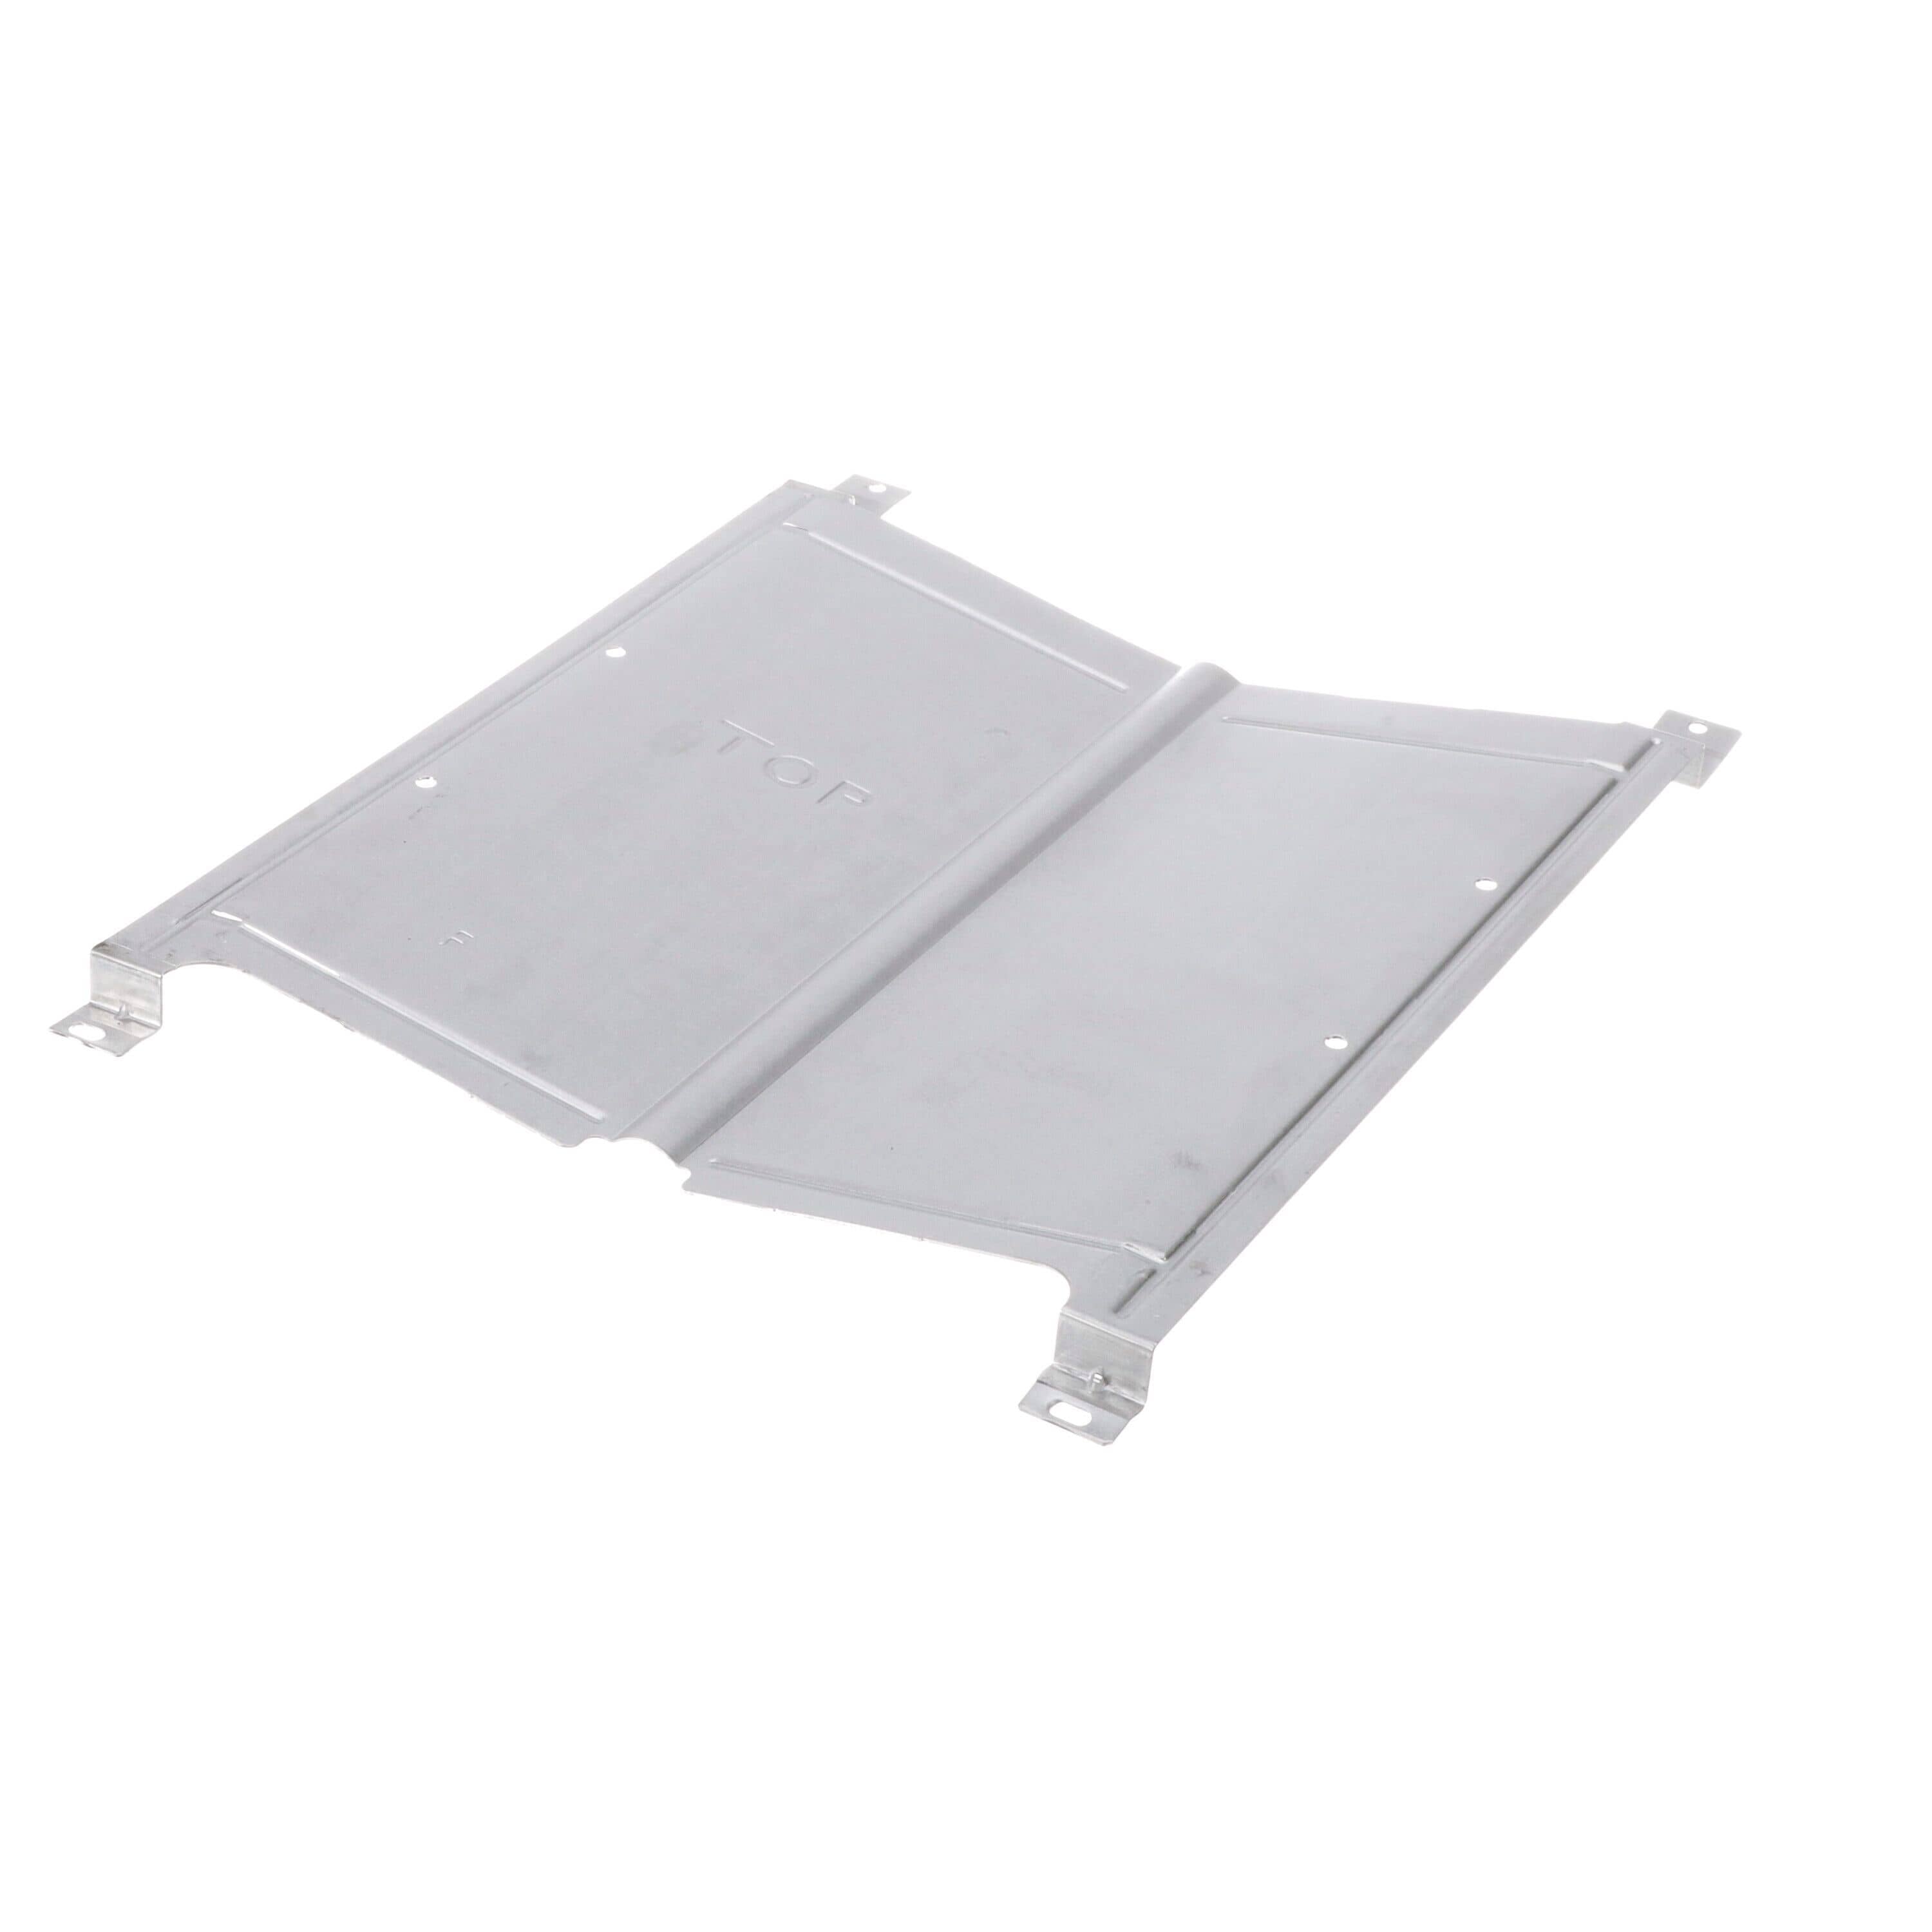 LG MCK61936501 Stove Heater Cover